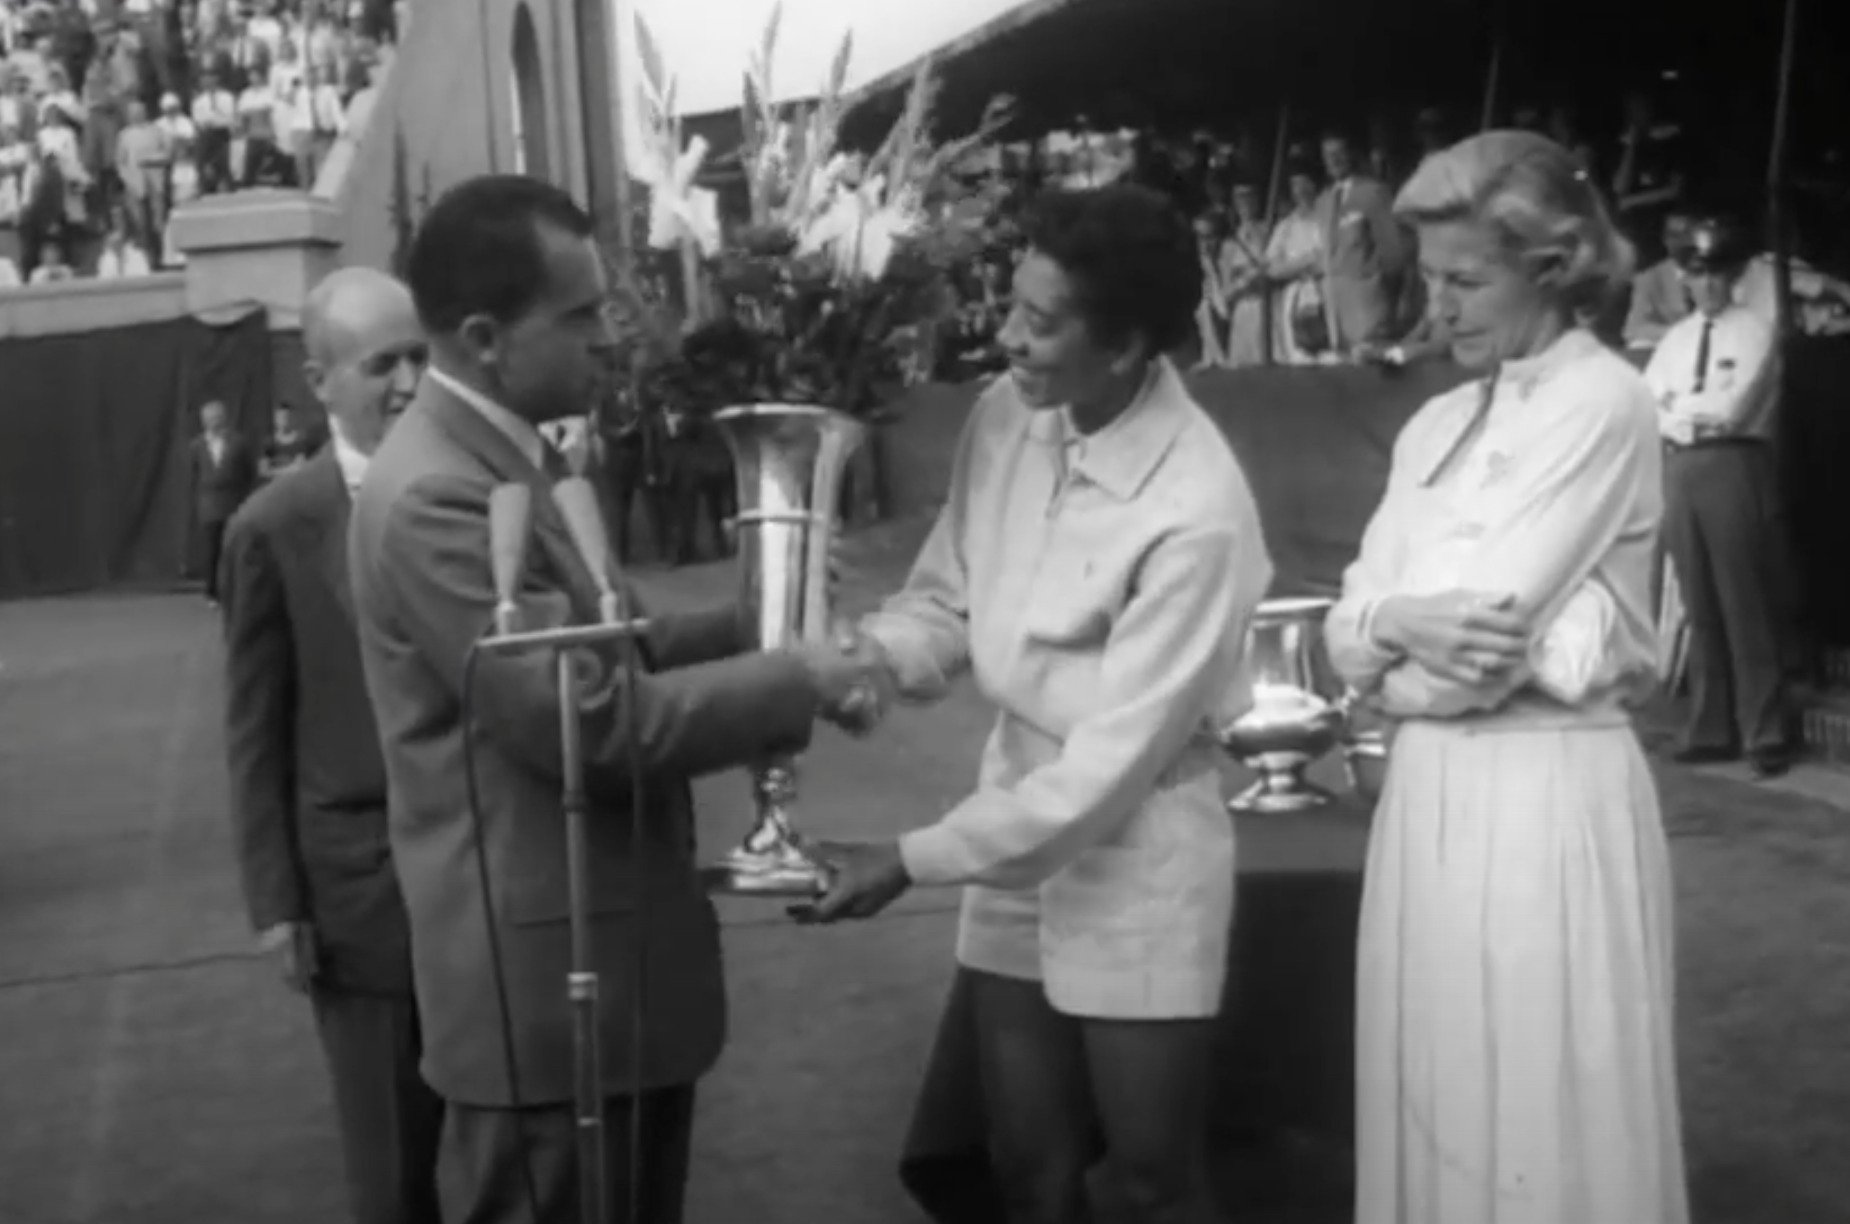 Long Before Serena, Althea Gibson Broke the Color Barrier – Her Accomplishments Transcend Serena’s by Several Decades